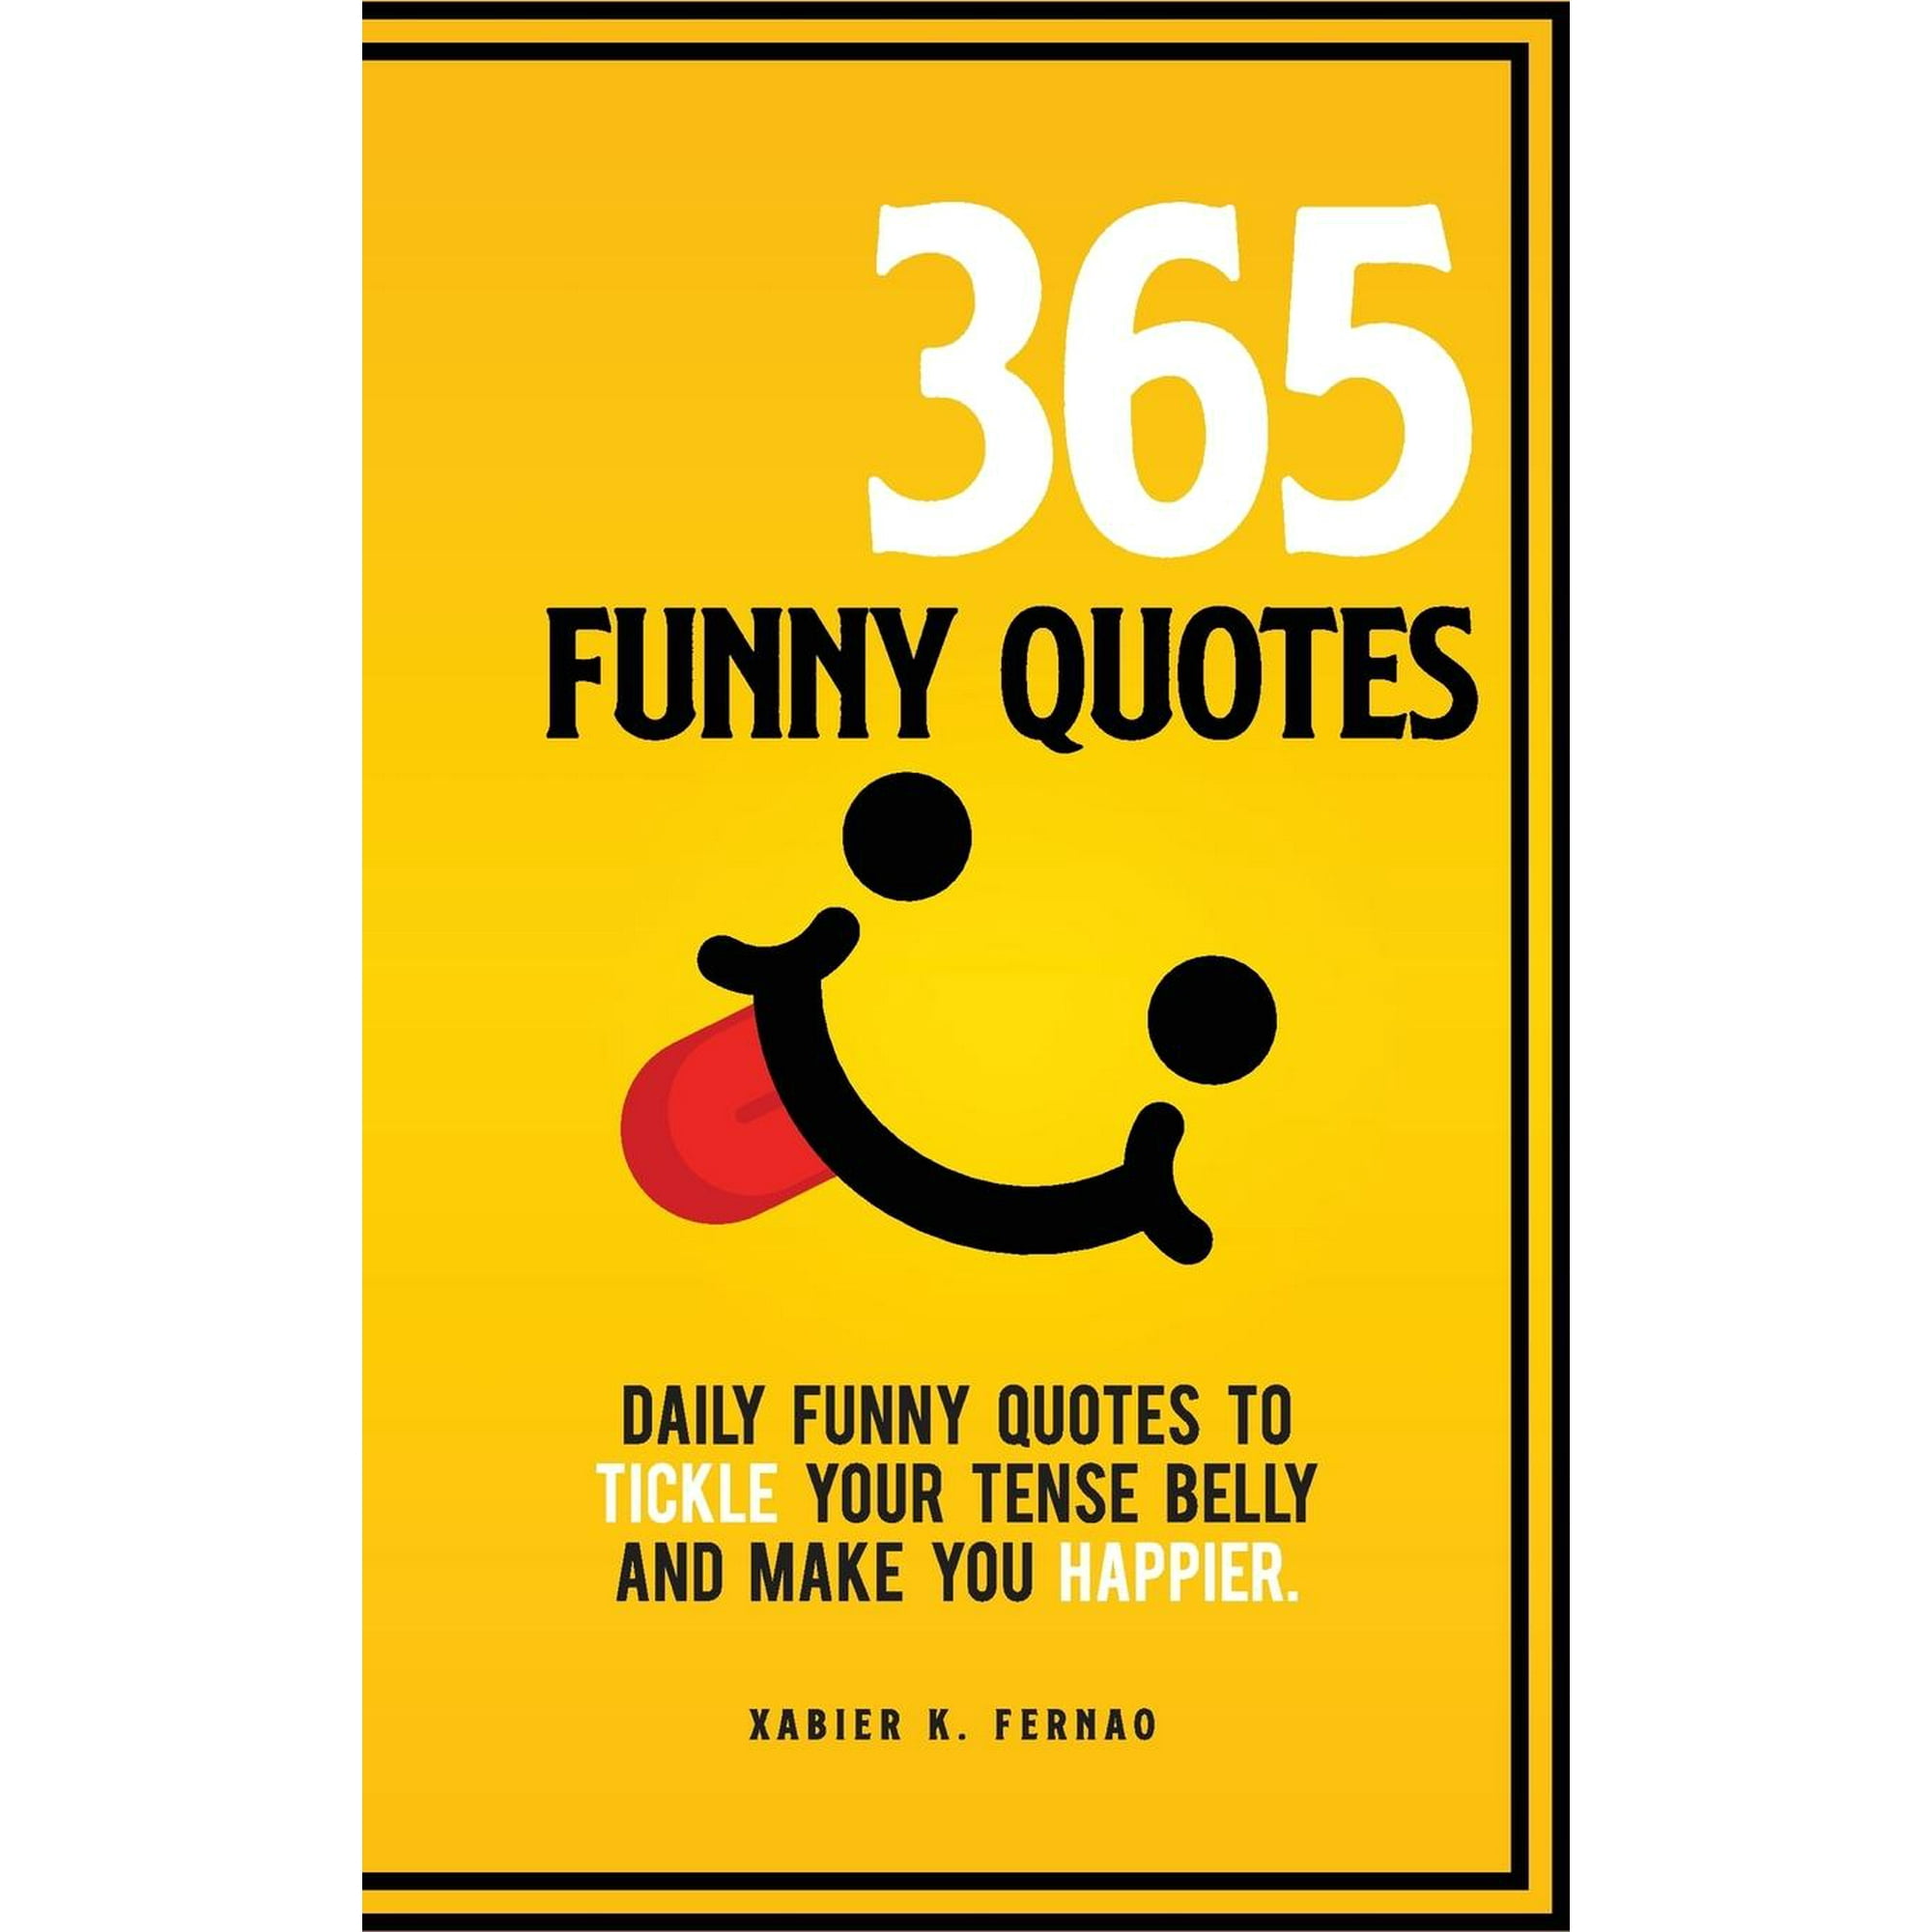 funny american quotes